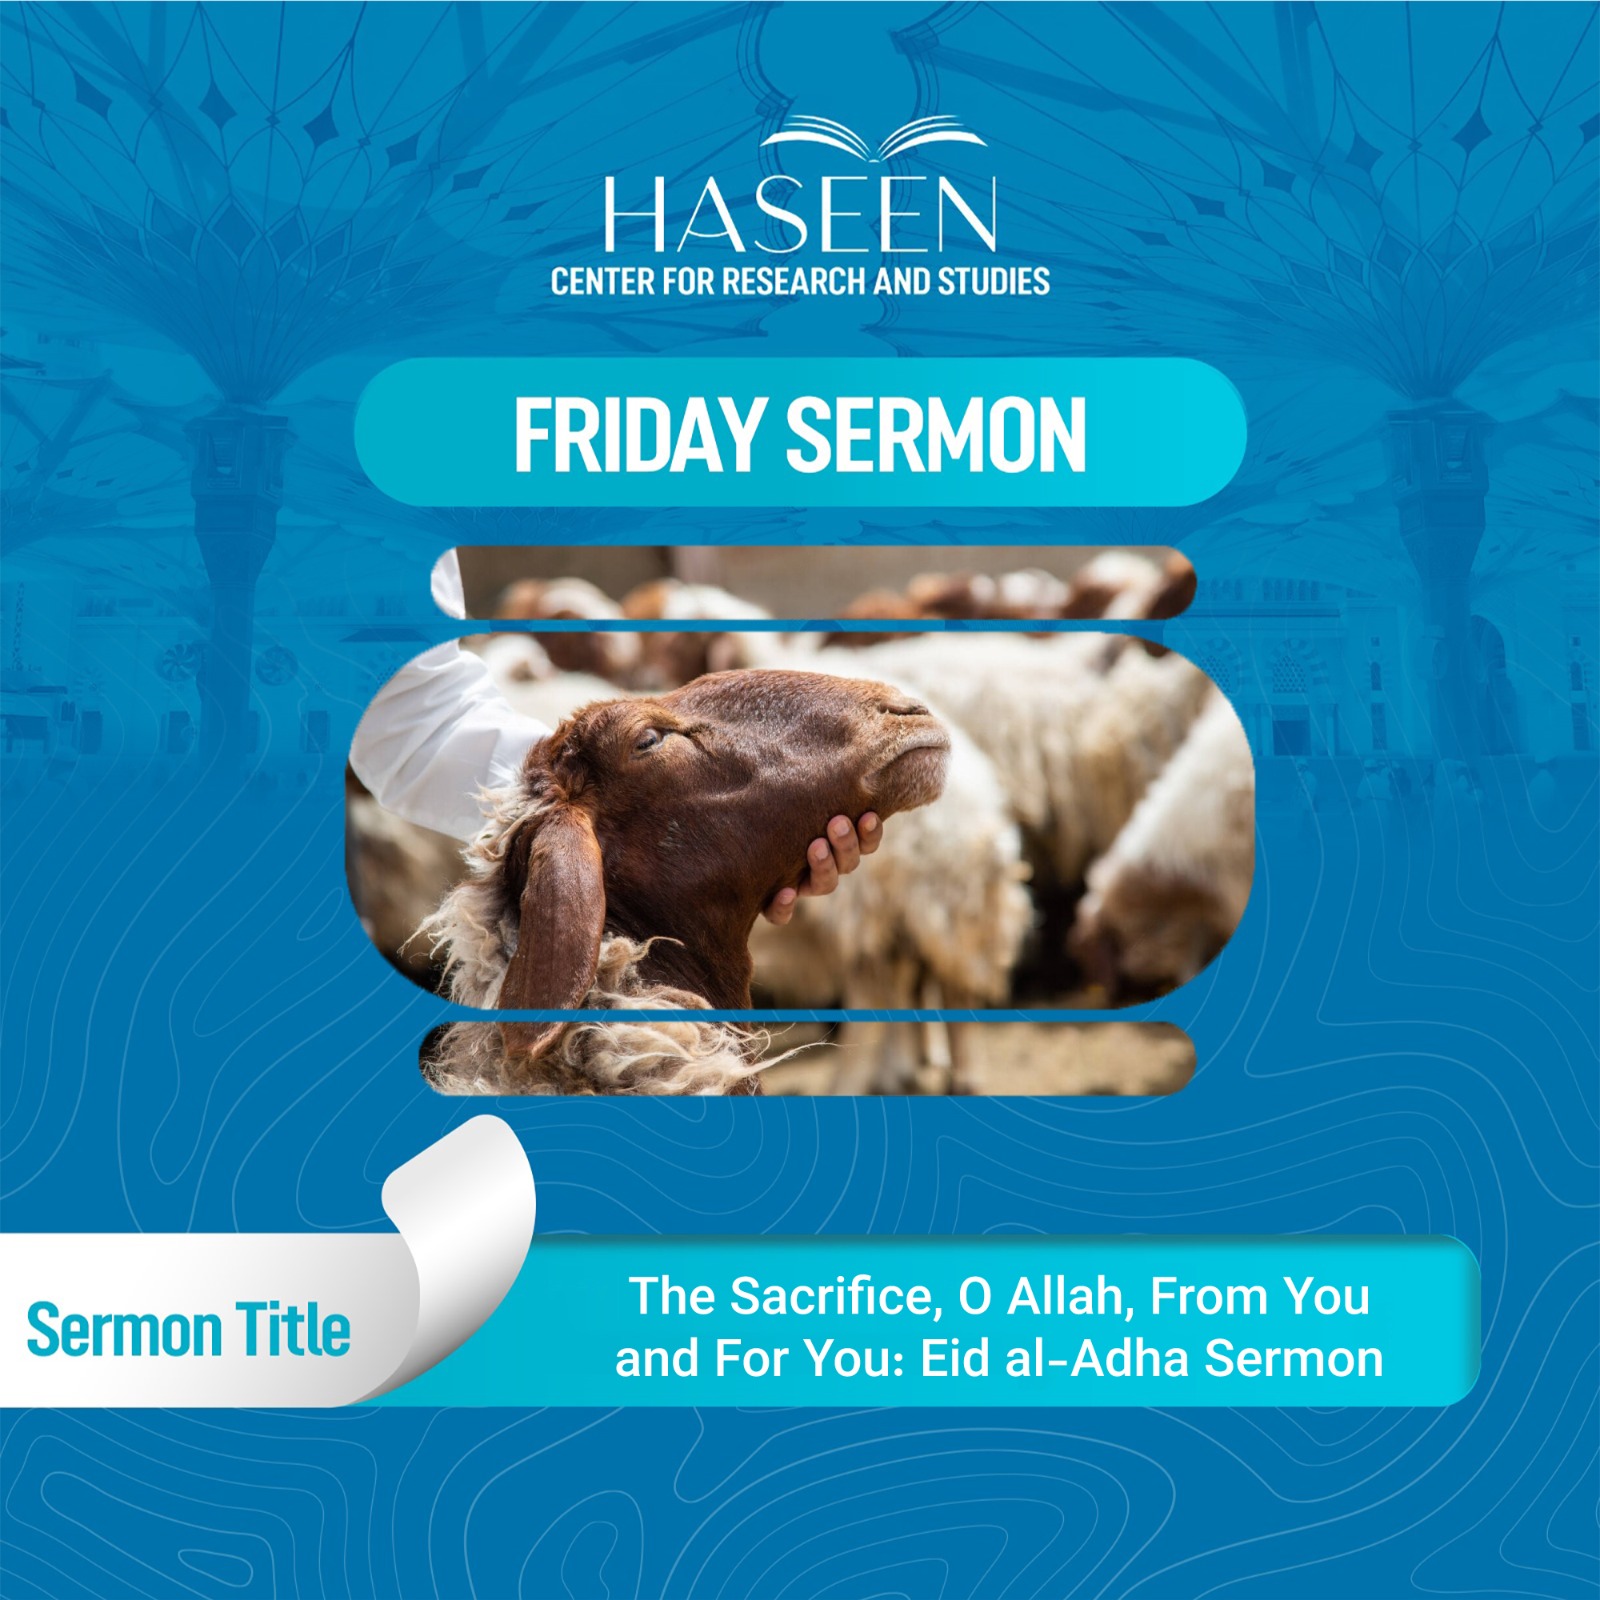 The Sacrifice, O Allah, From You and For You: Eid al-Adha Sermon